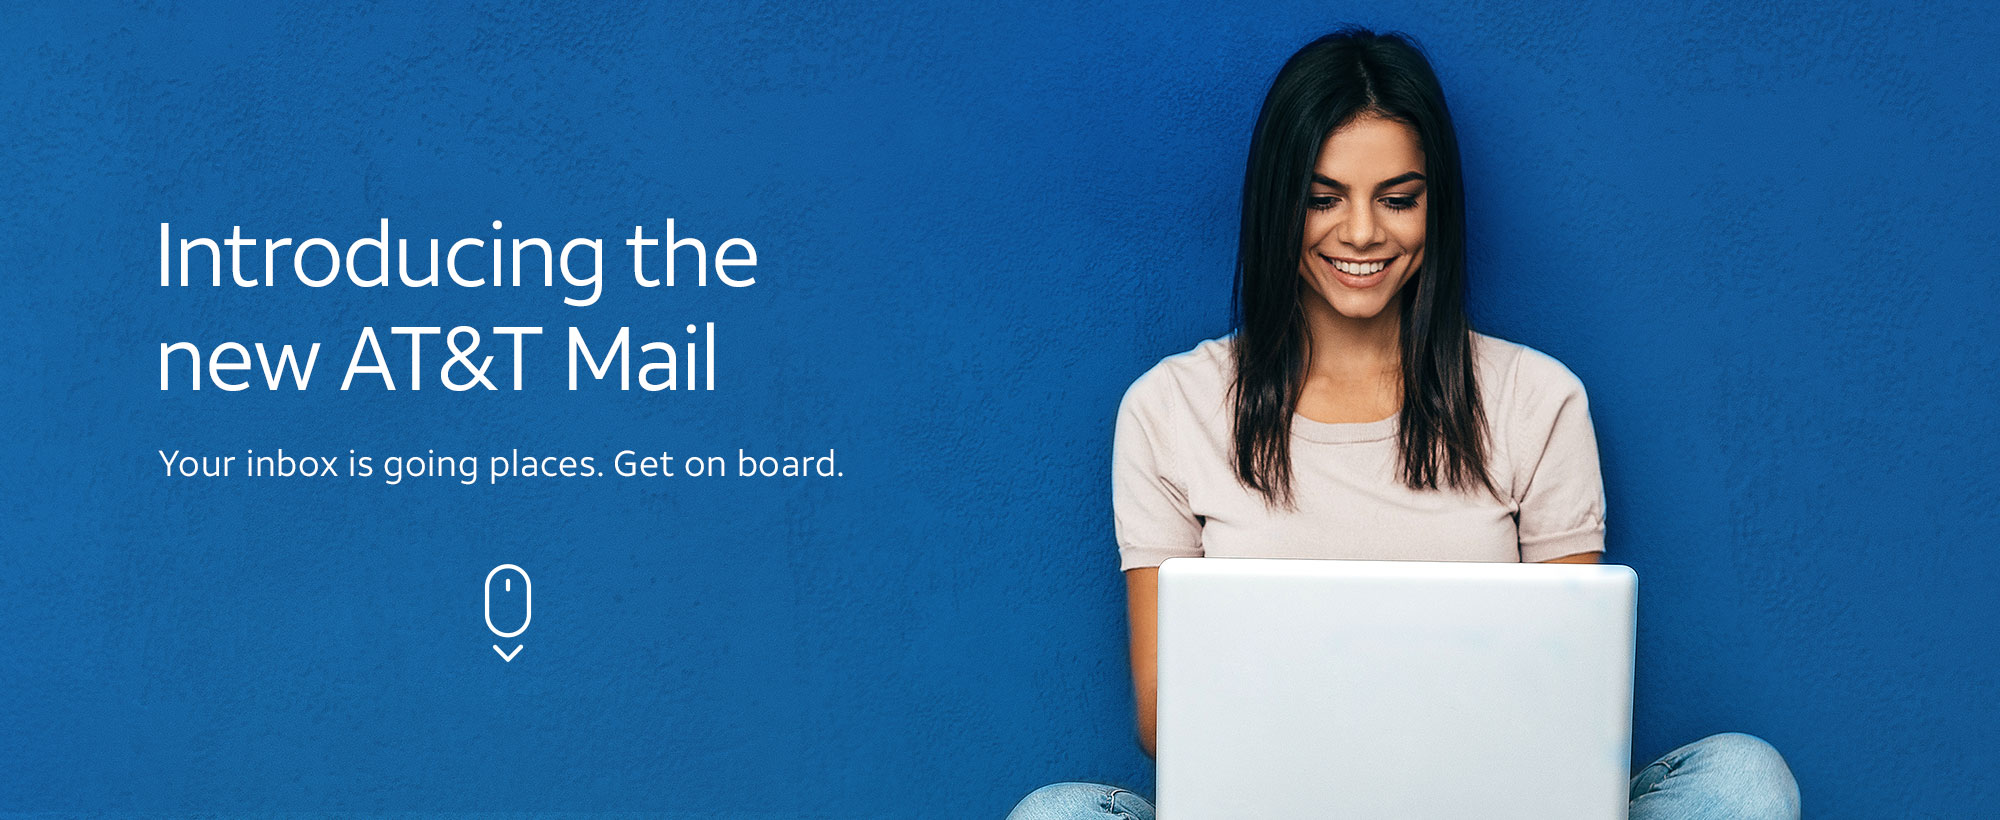 Introducing the new AT&T Mail. Your inbox is going places. Get onboard.